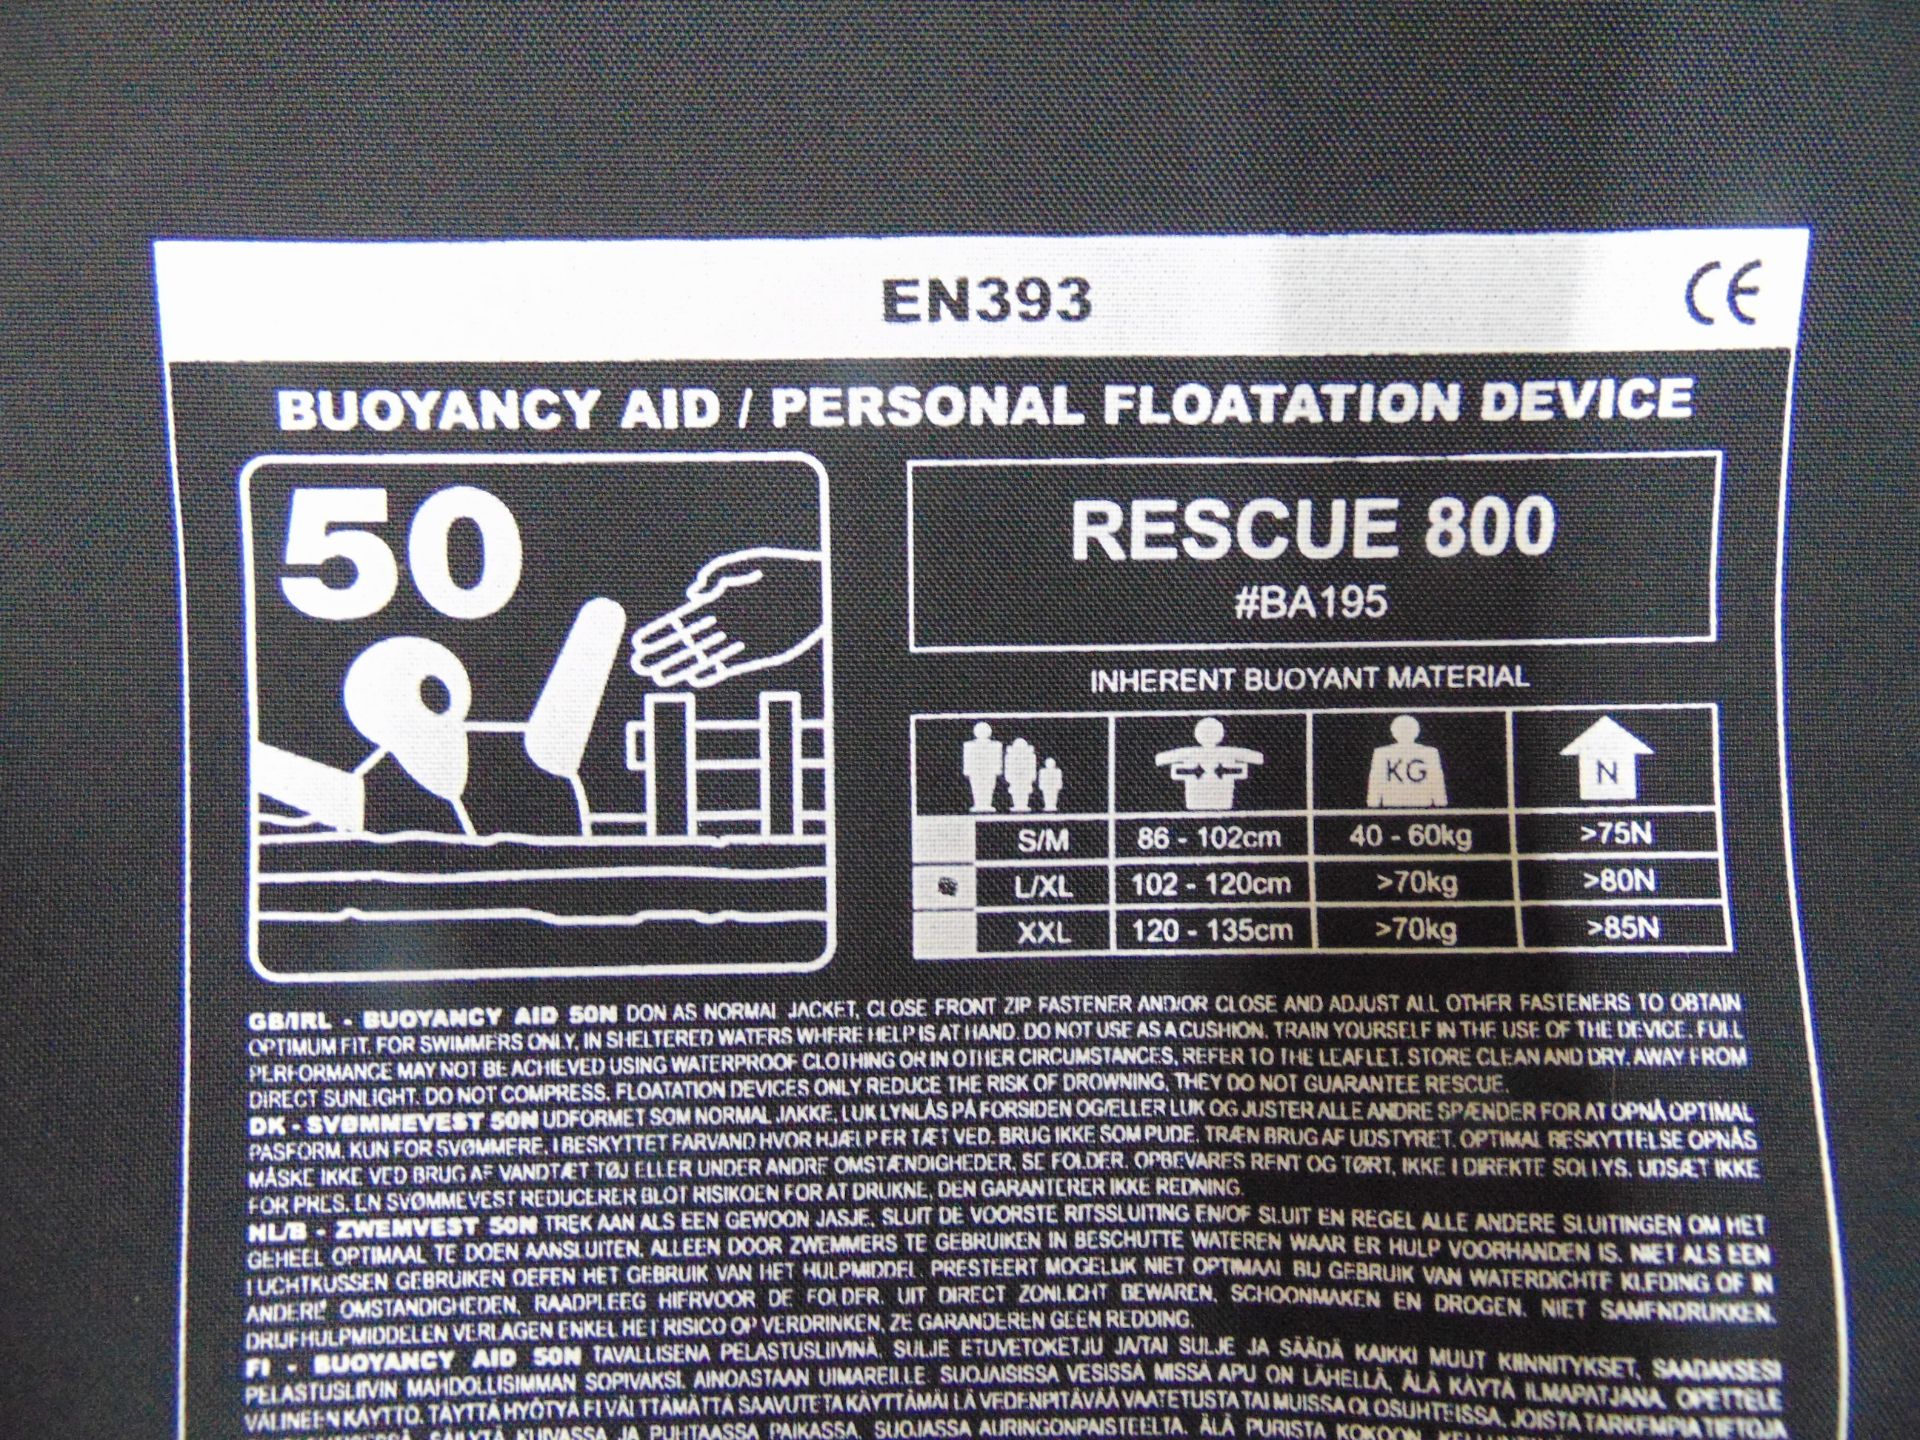 Palm Professional Rescue 800 Buoyancy Aid - PFD Personal Floatation Device Size L/XL - Image 7 of 8